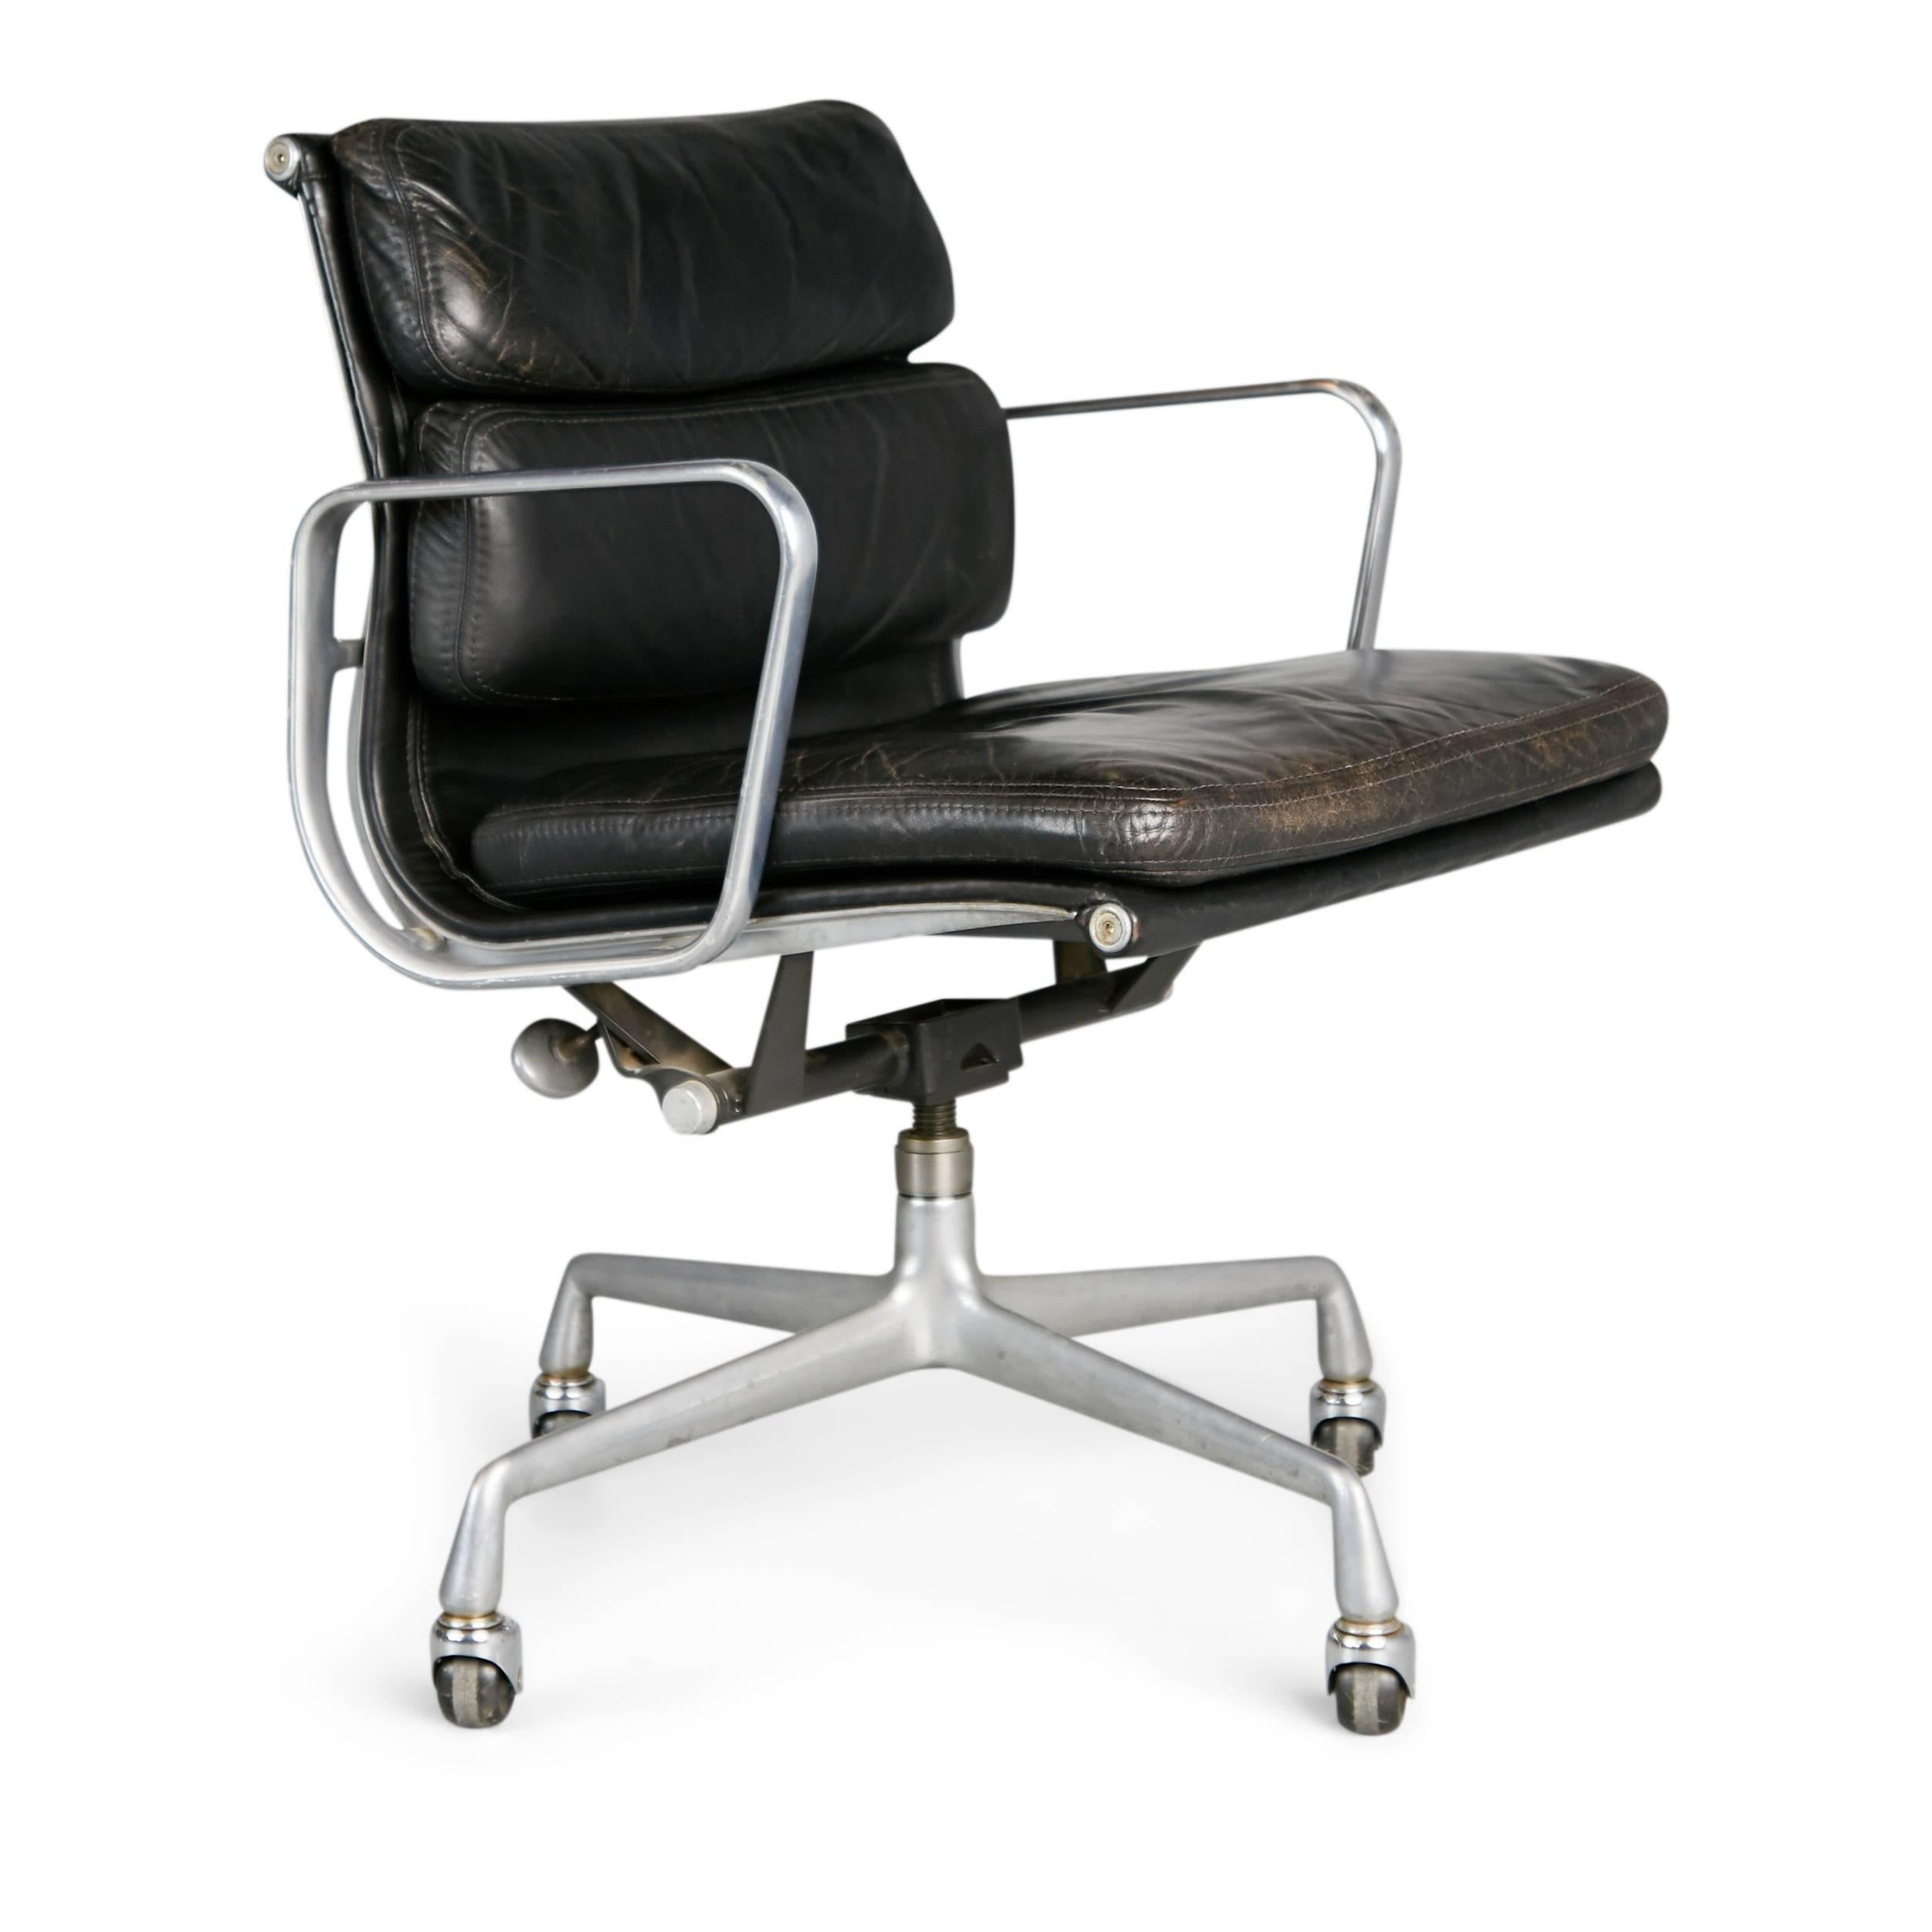 Mid-Century Modern Charles Eames for Herman Miller Black Soft Pad Management Chairs, circa 1980